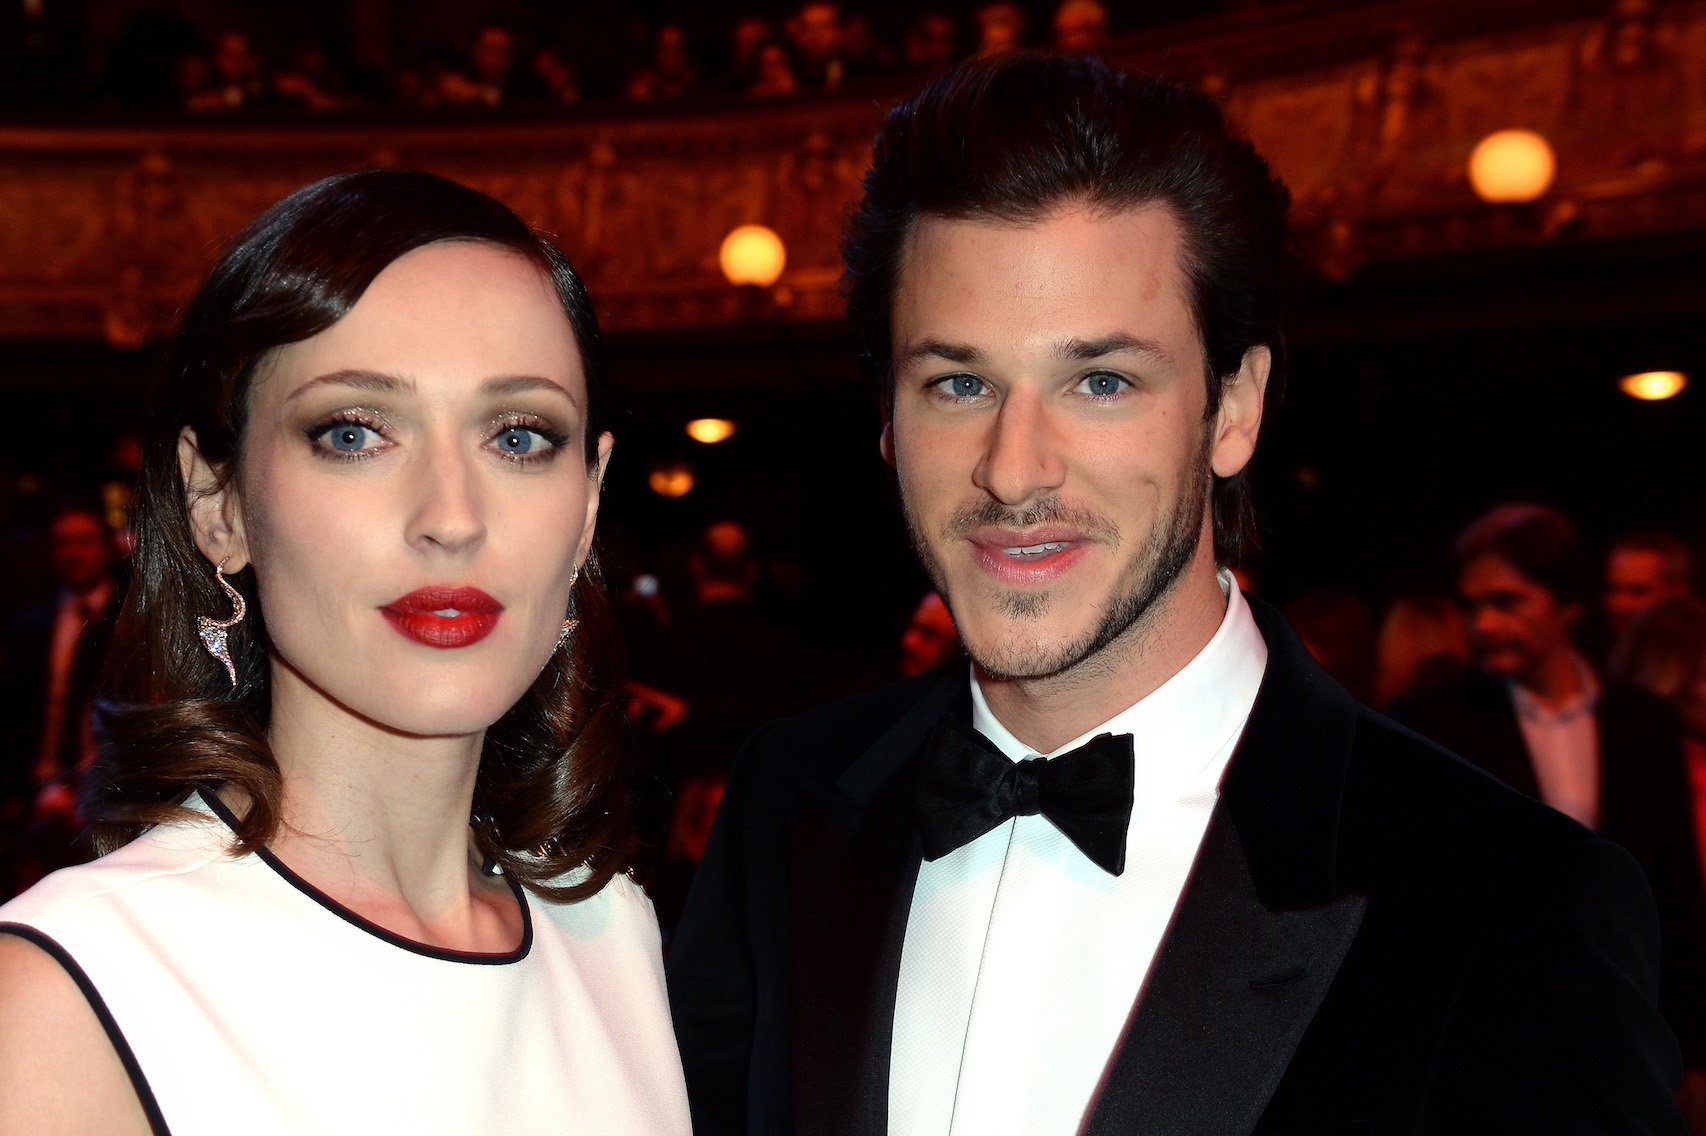 Gaspard Ulliel and his partner, Gaëlle Piétri|, standing with each other at an awards ceremony